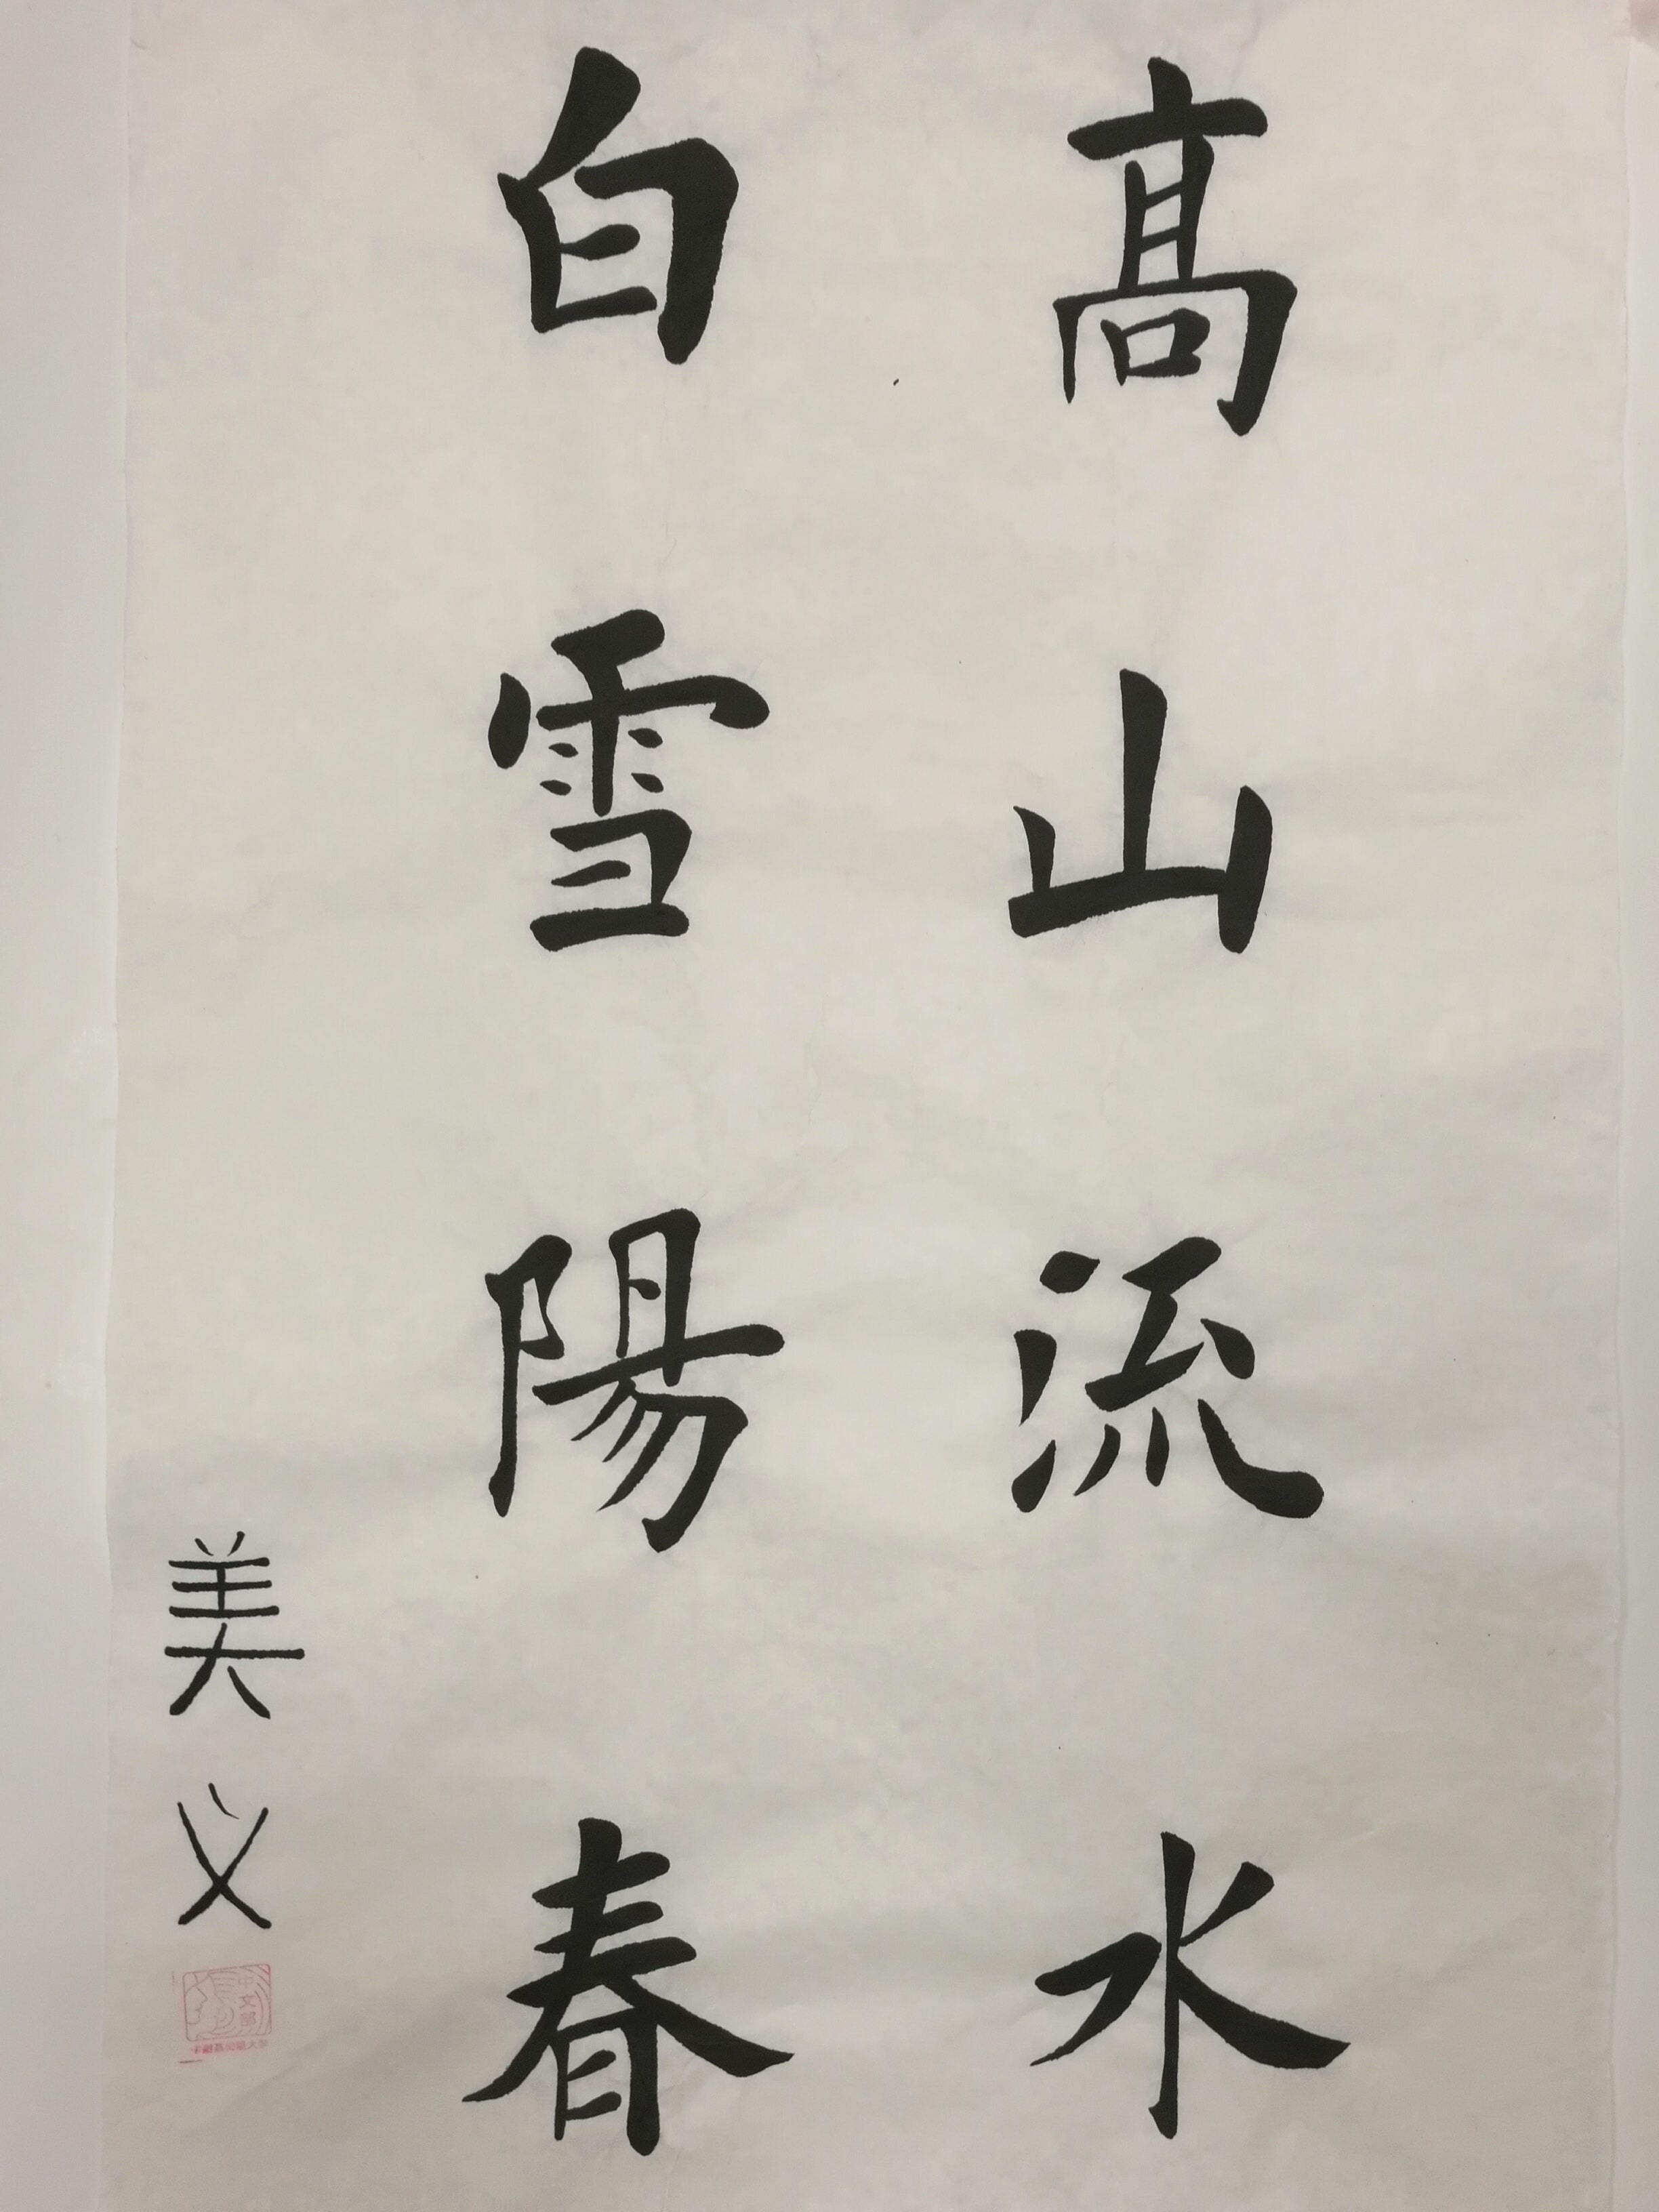 Chinese calligraphy by Maitreyee Deshpande